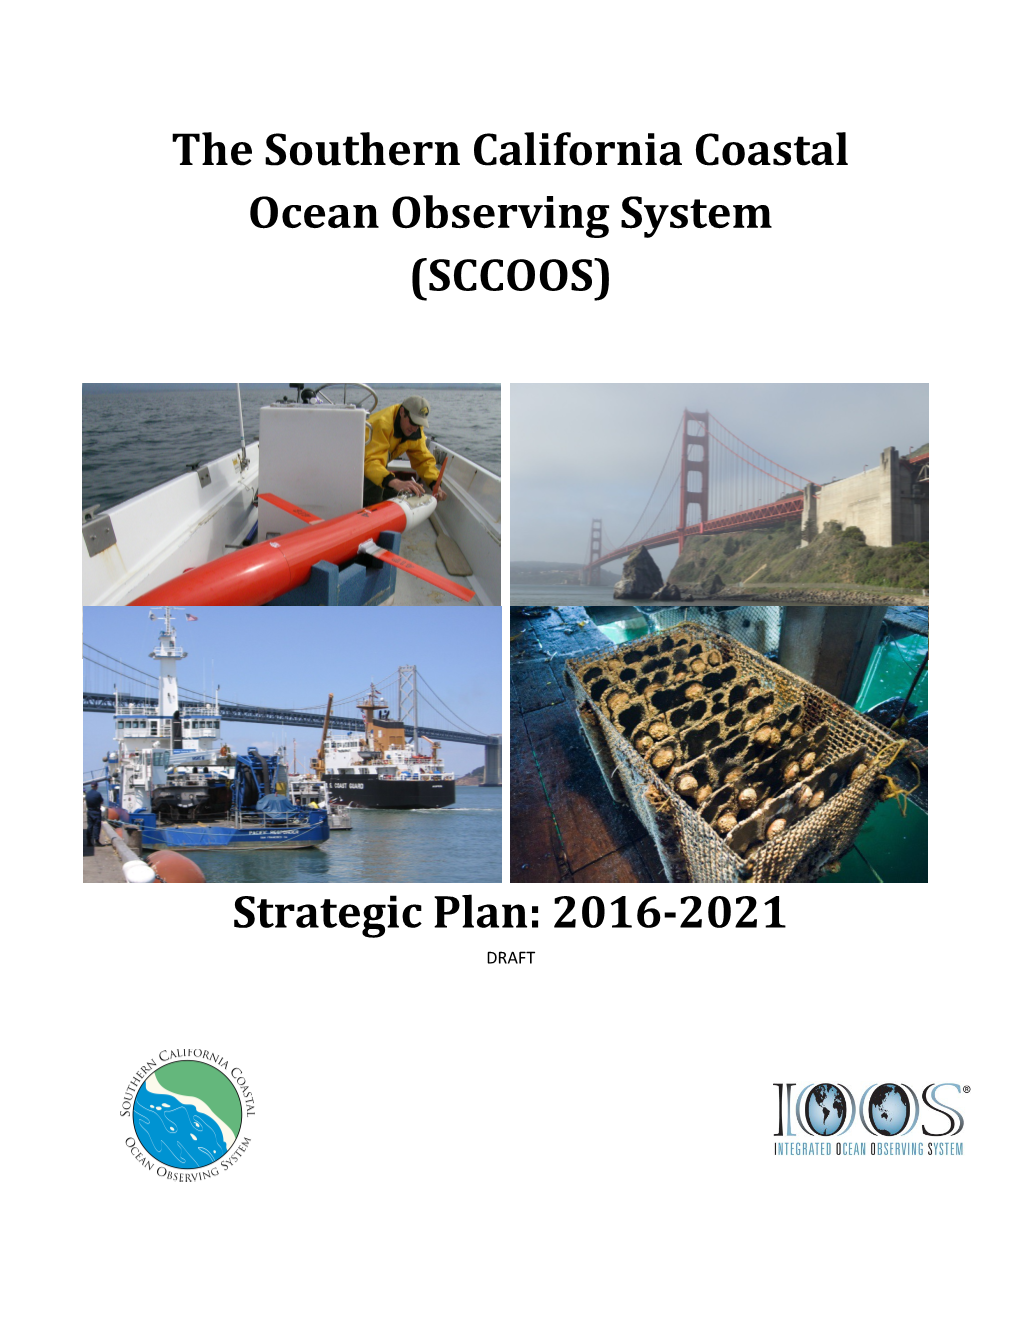 The Southern California Coastal Ocean Observing System